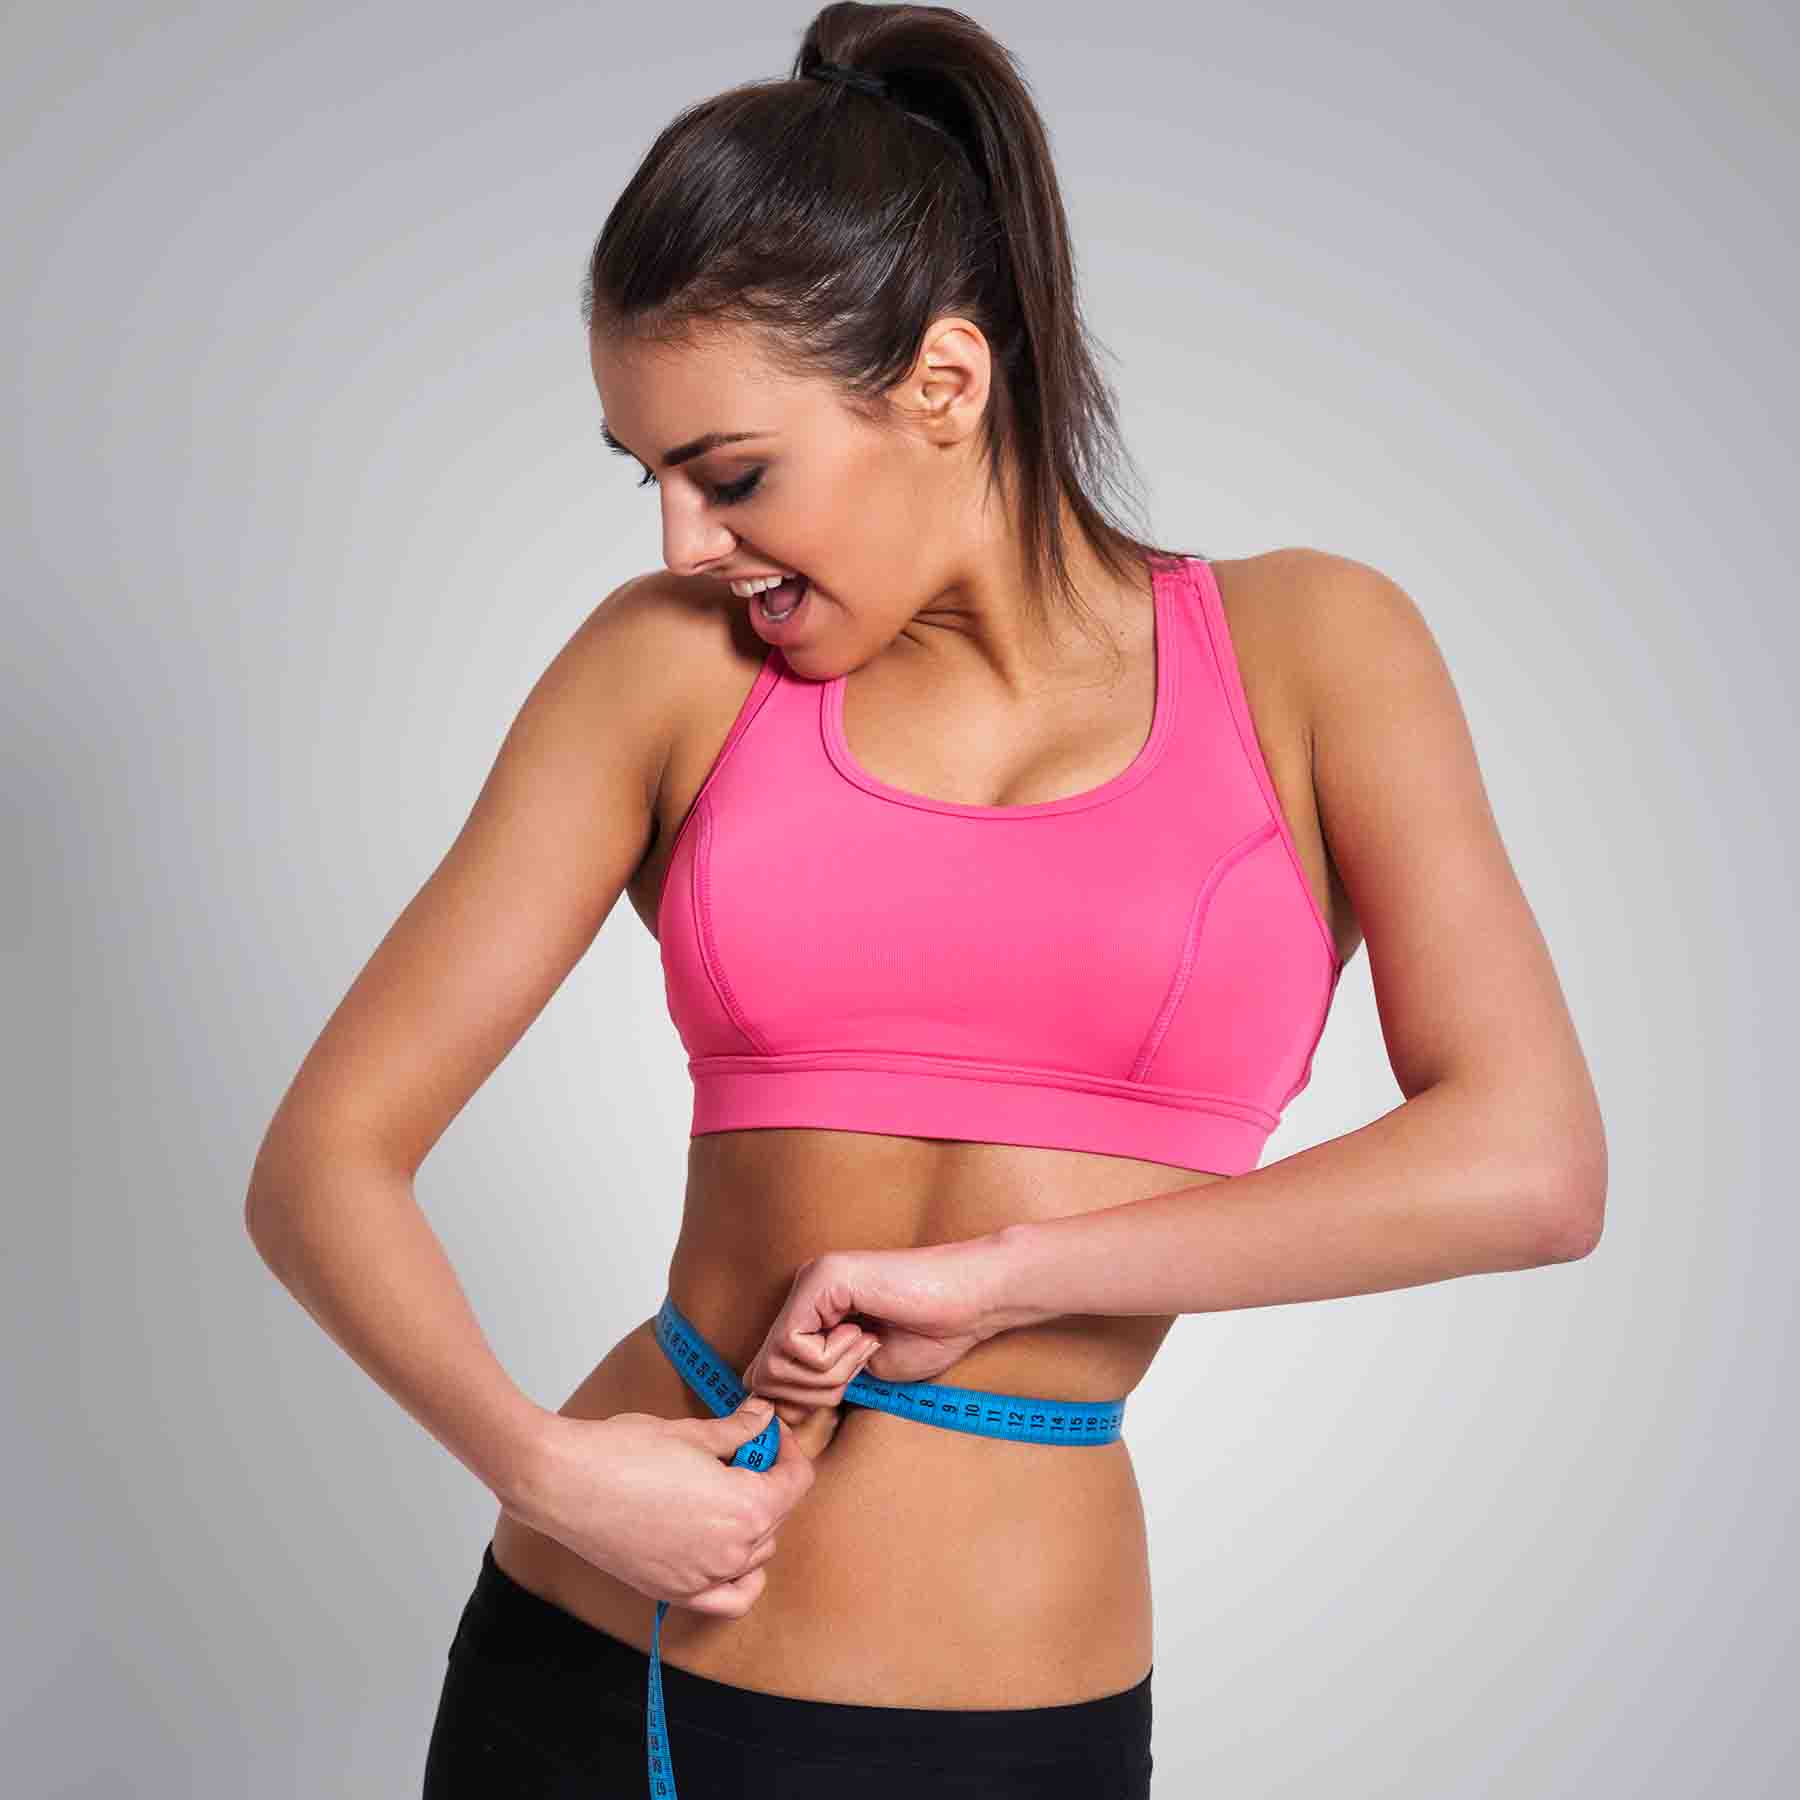 Do you lose weight with body contouring